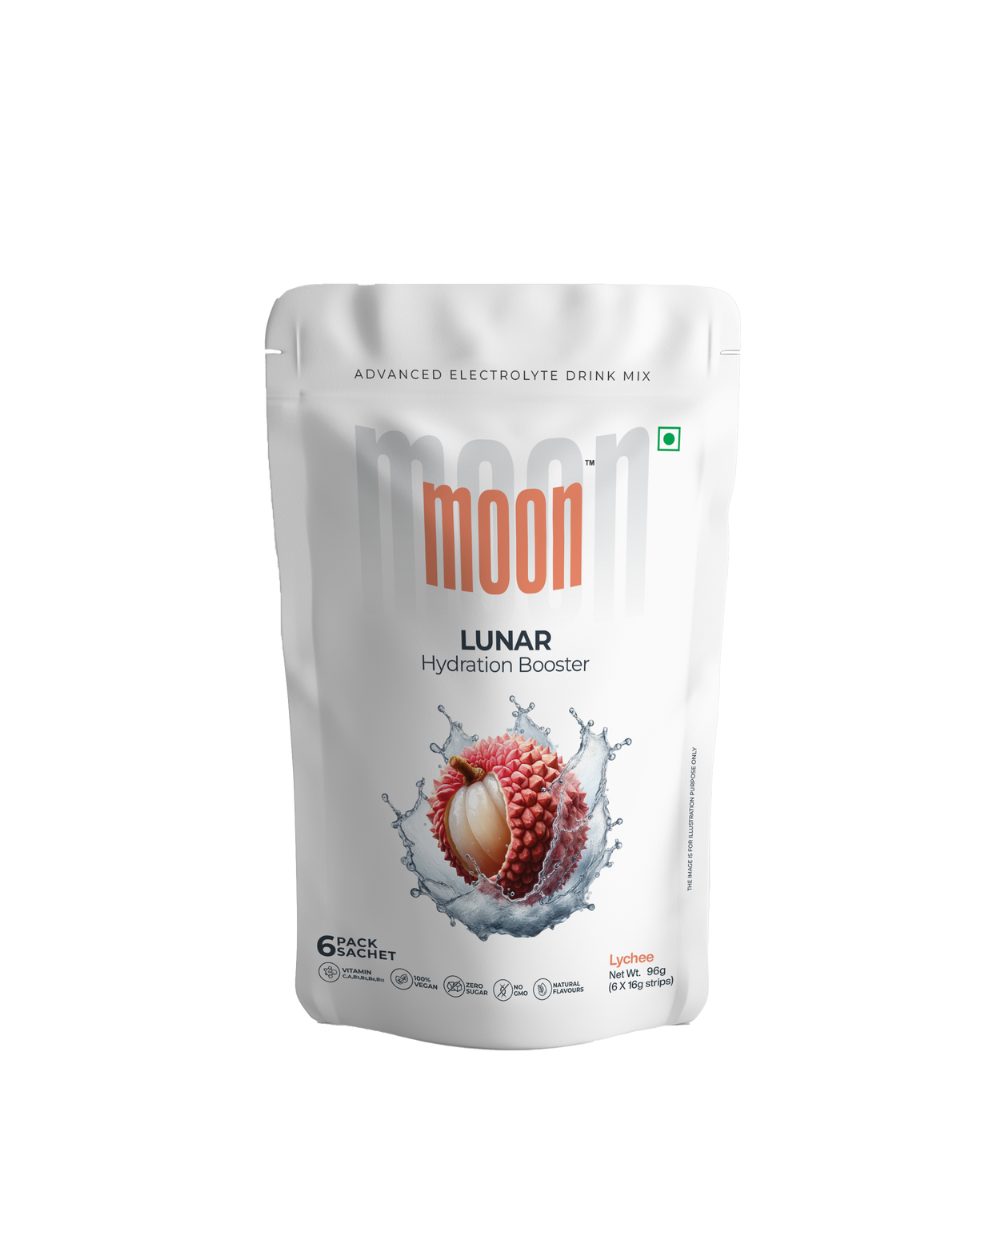 A pouch of Moon Lychee Lunar Hydration Booster powder on a white background.